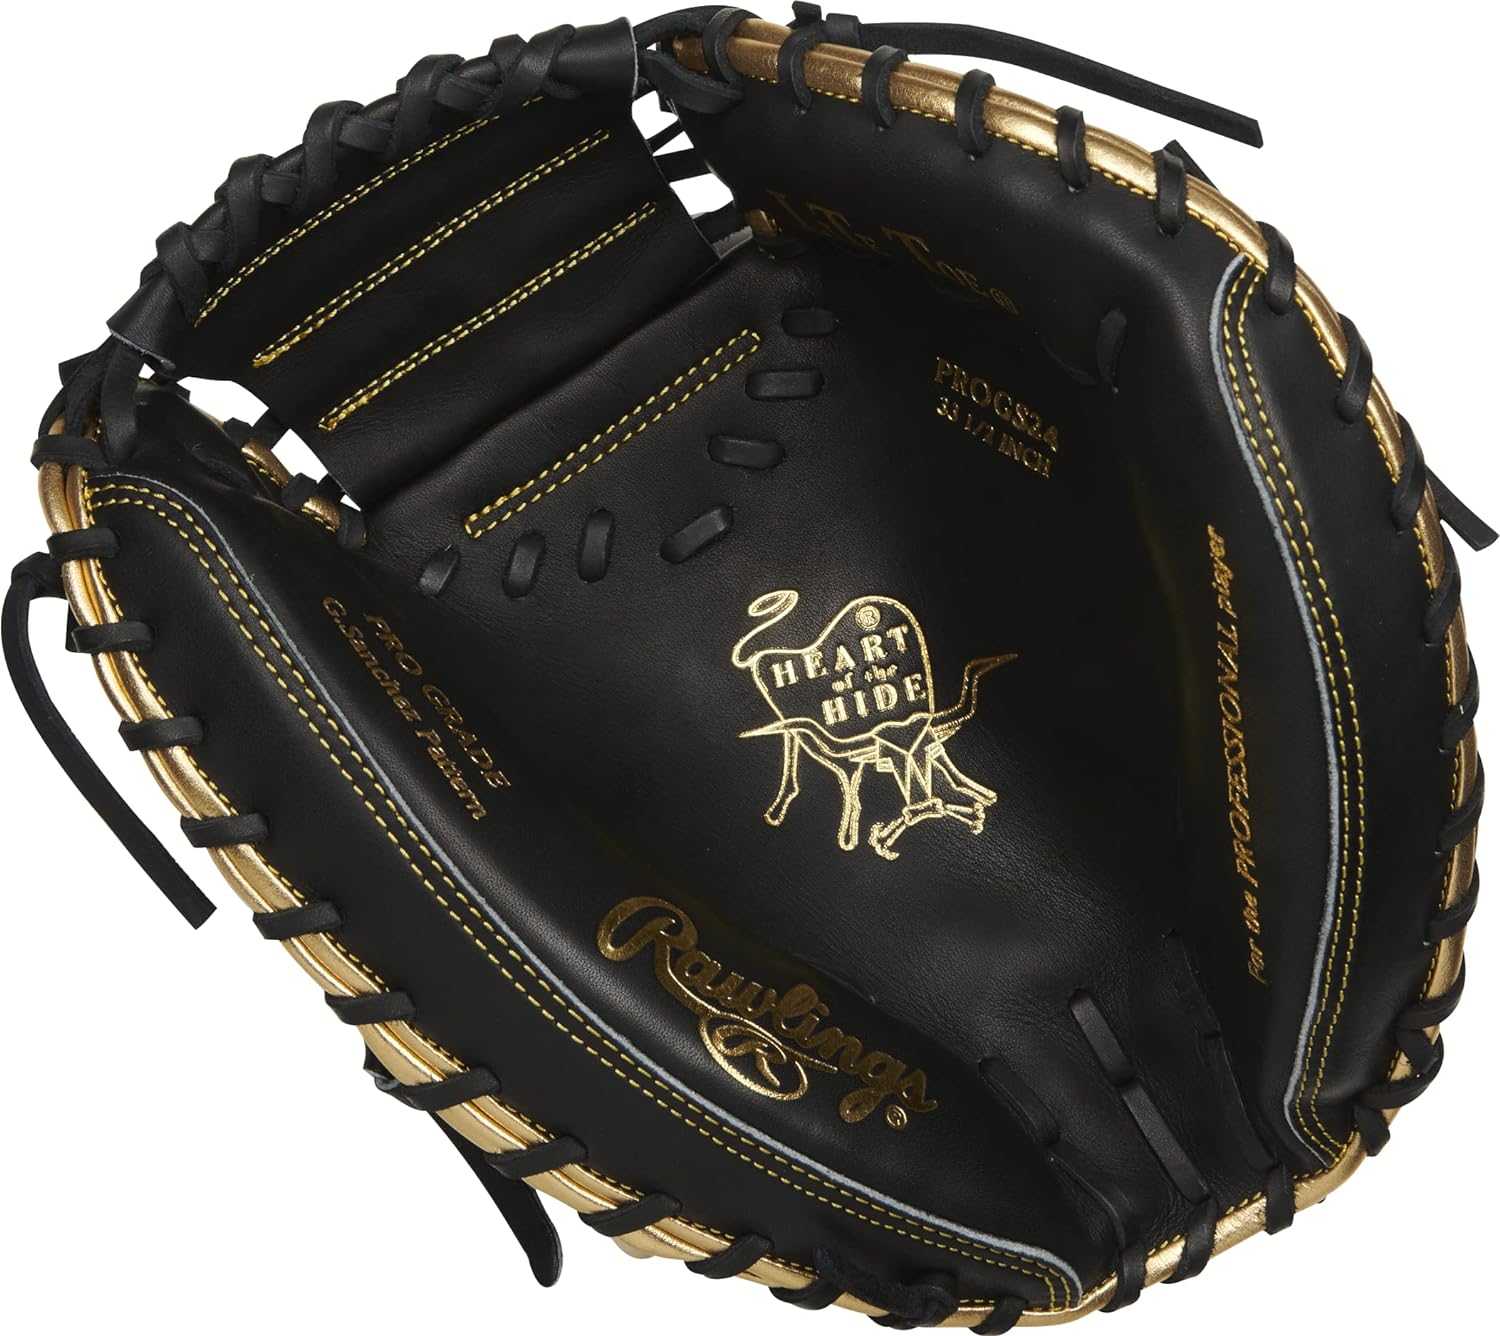 Rawlings Heart of The Hide PROGS24 33.5  Catcher's Mitt - Black Gold - HIT a Double